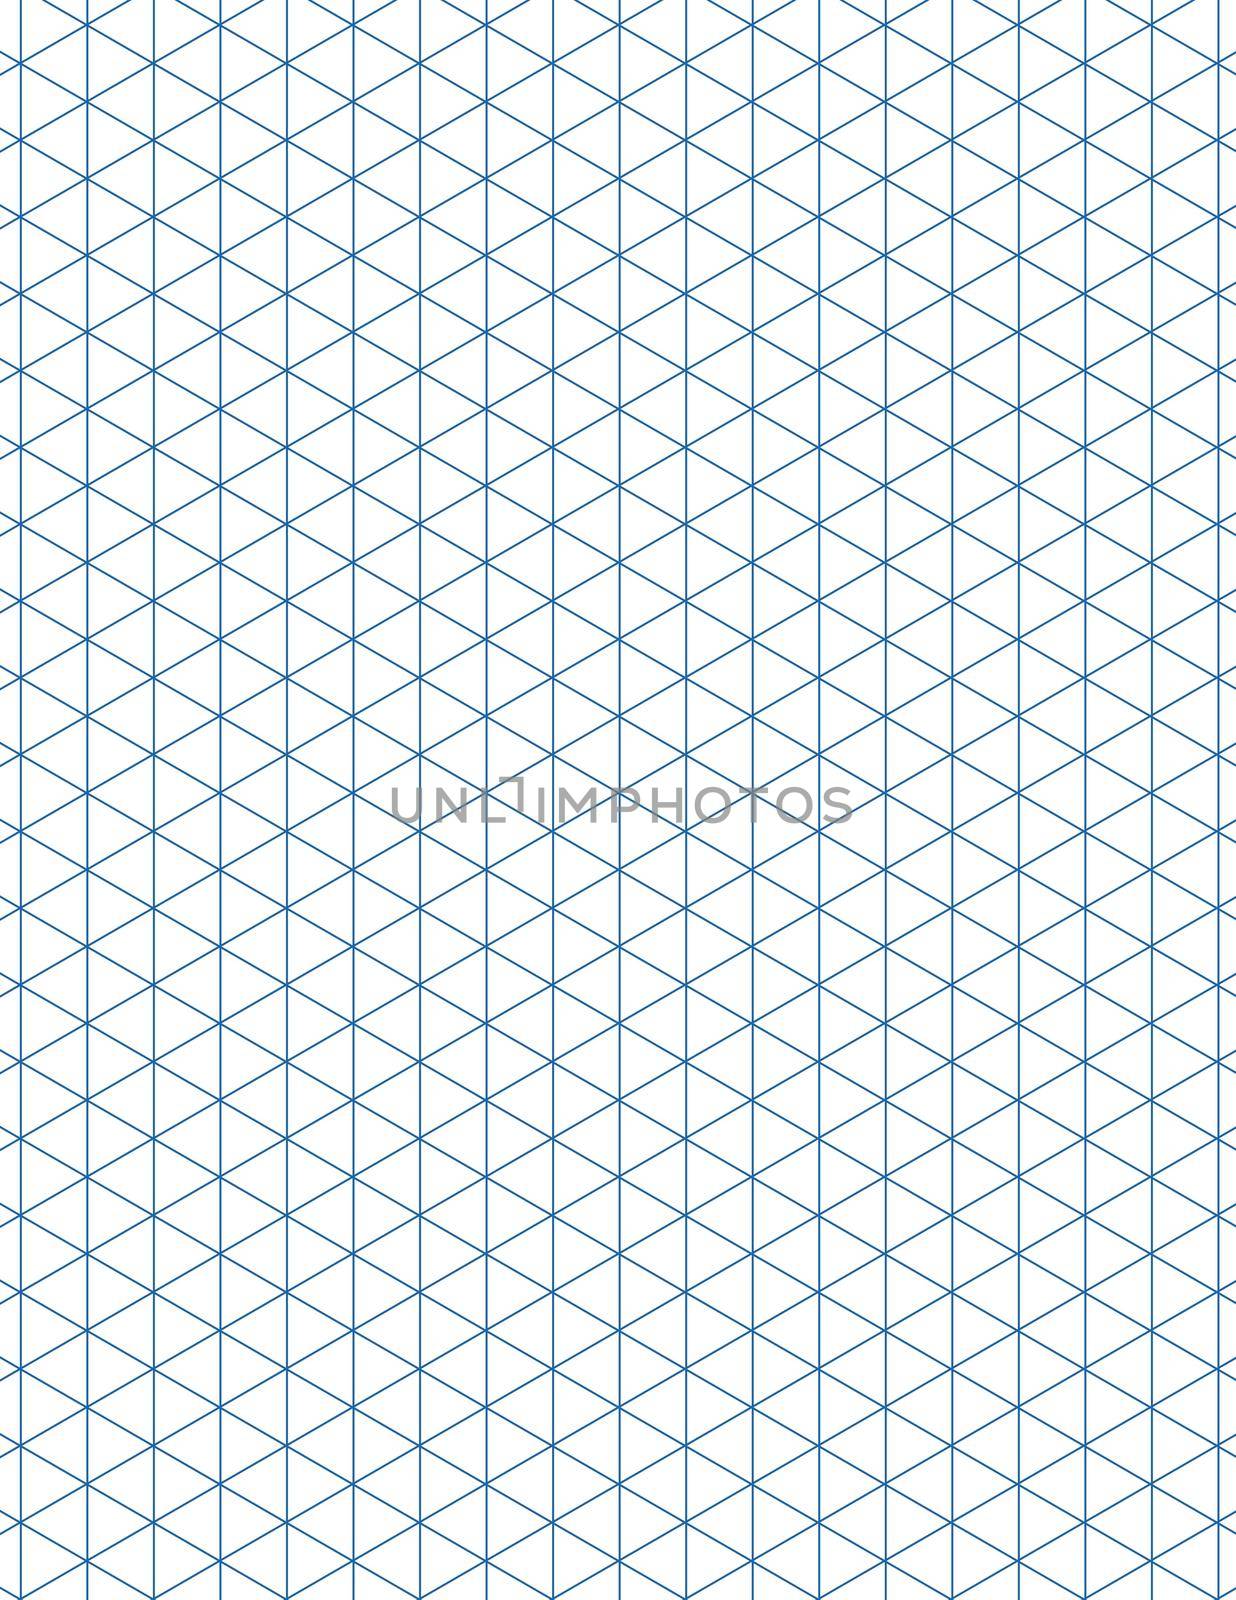 Graph paper. Printable isometric color grid paper with color lines. Geometric background for school, textures, notebook, diary, notes, print, books. Realistic lined paper blank size Letter.